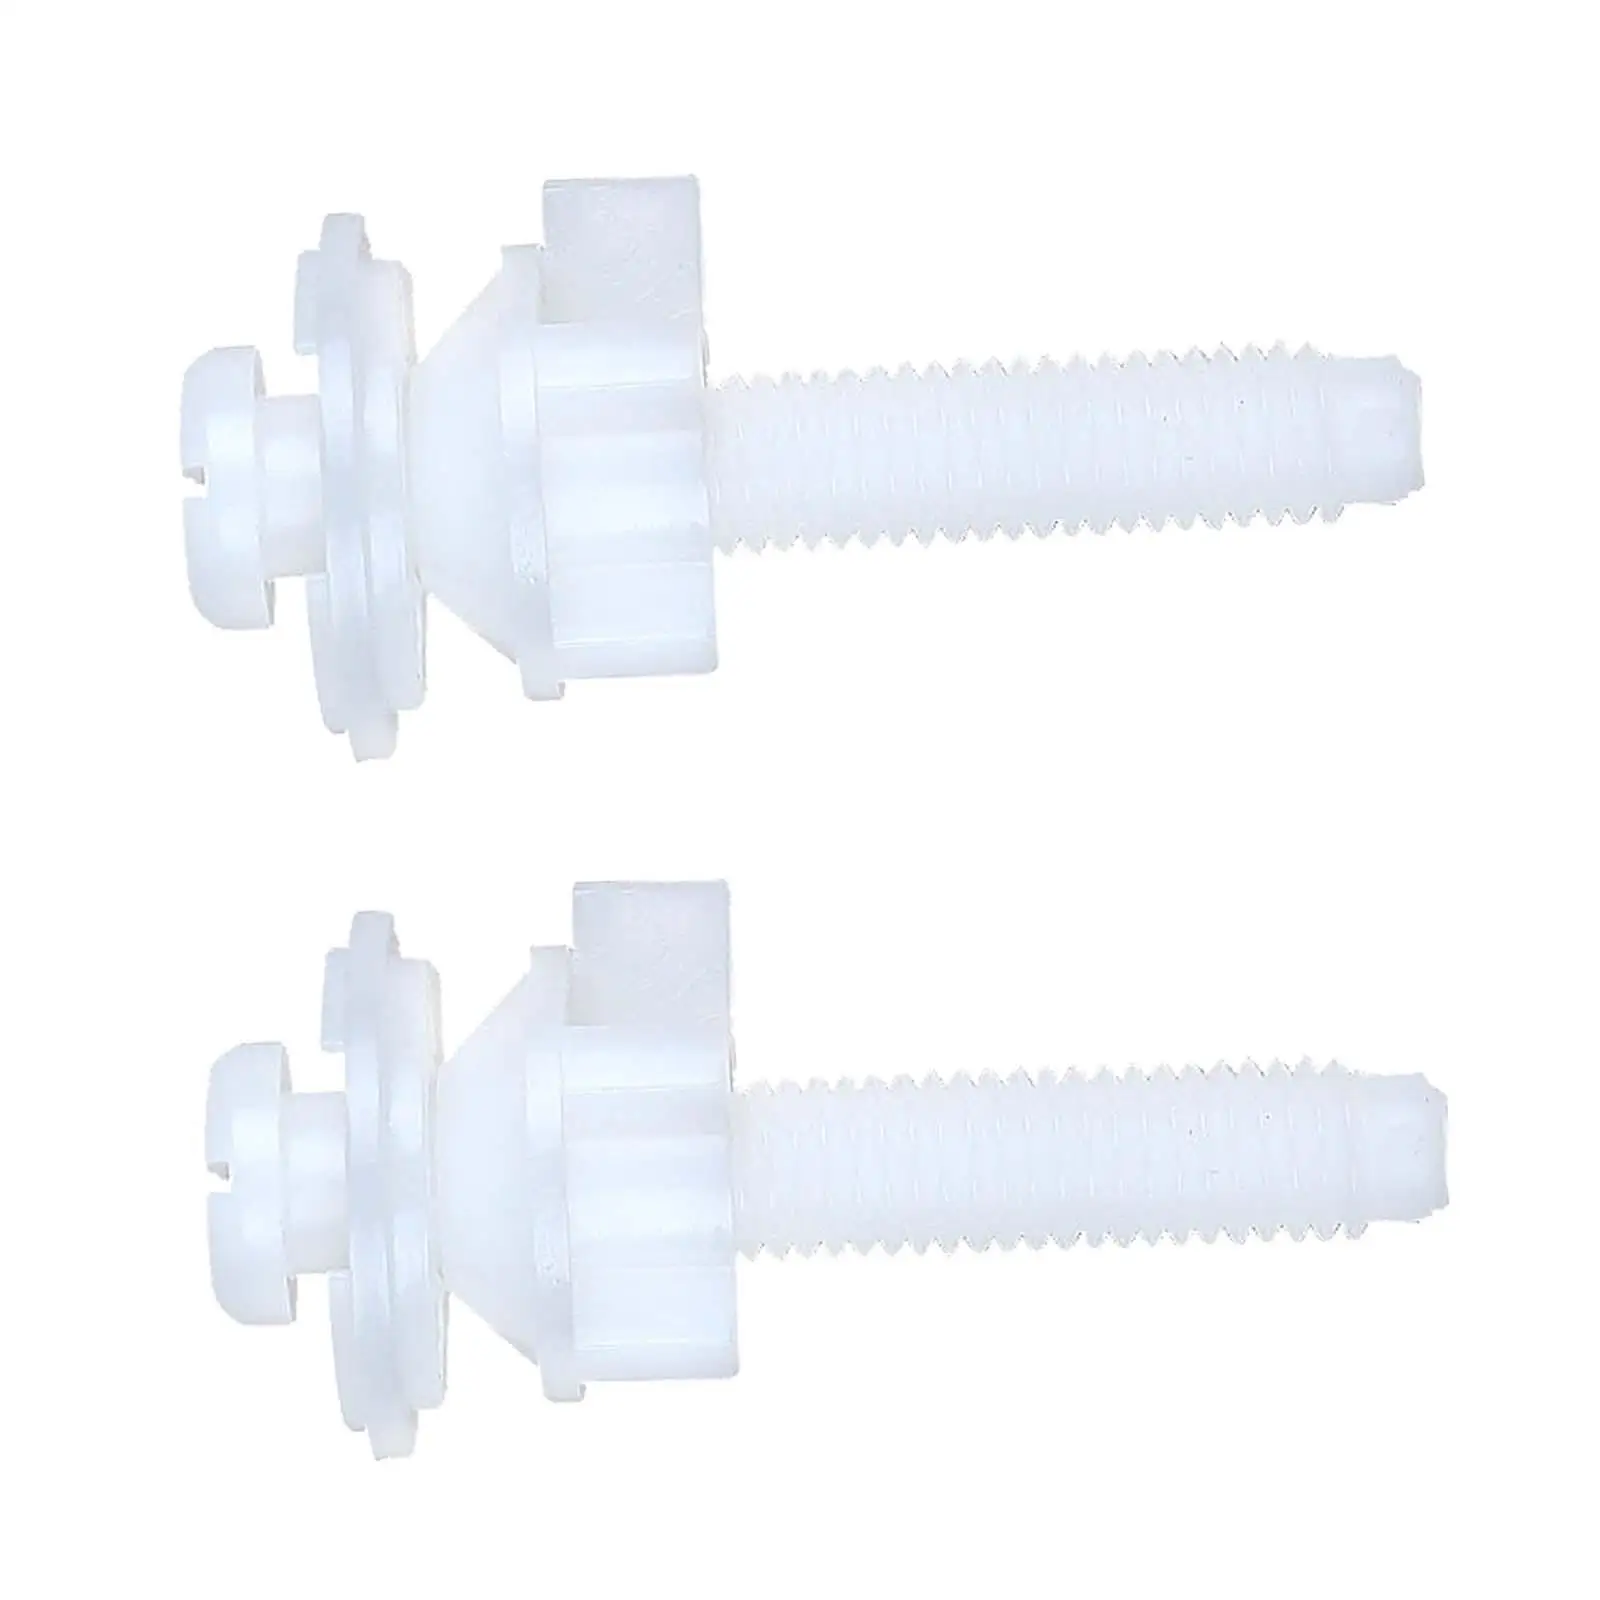 2 Pieces Toilet Seat Screws Replacement Hardware Kits Nuts Washers Fix Expanding Screws Fastener Accessories for Toilet Seat